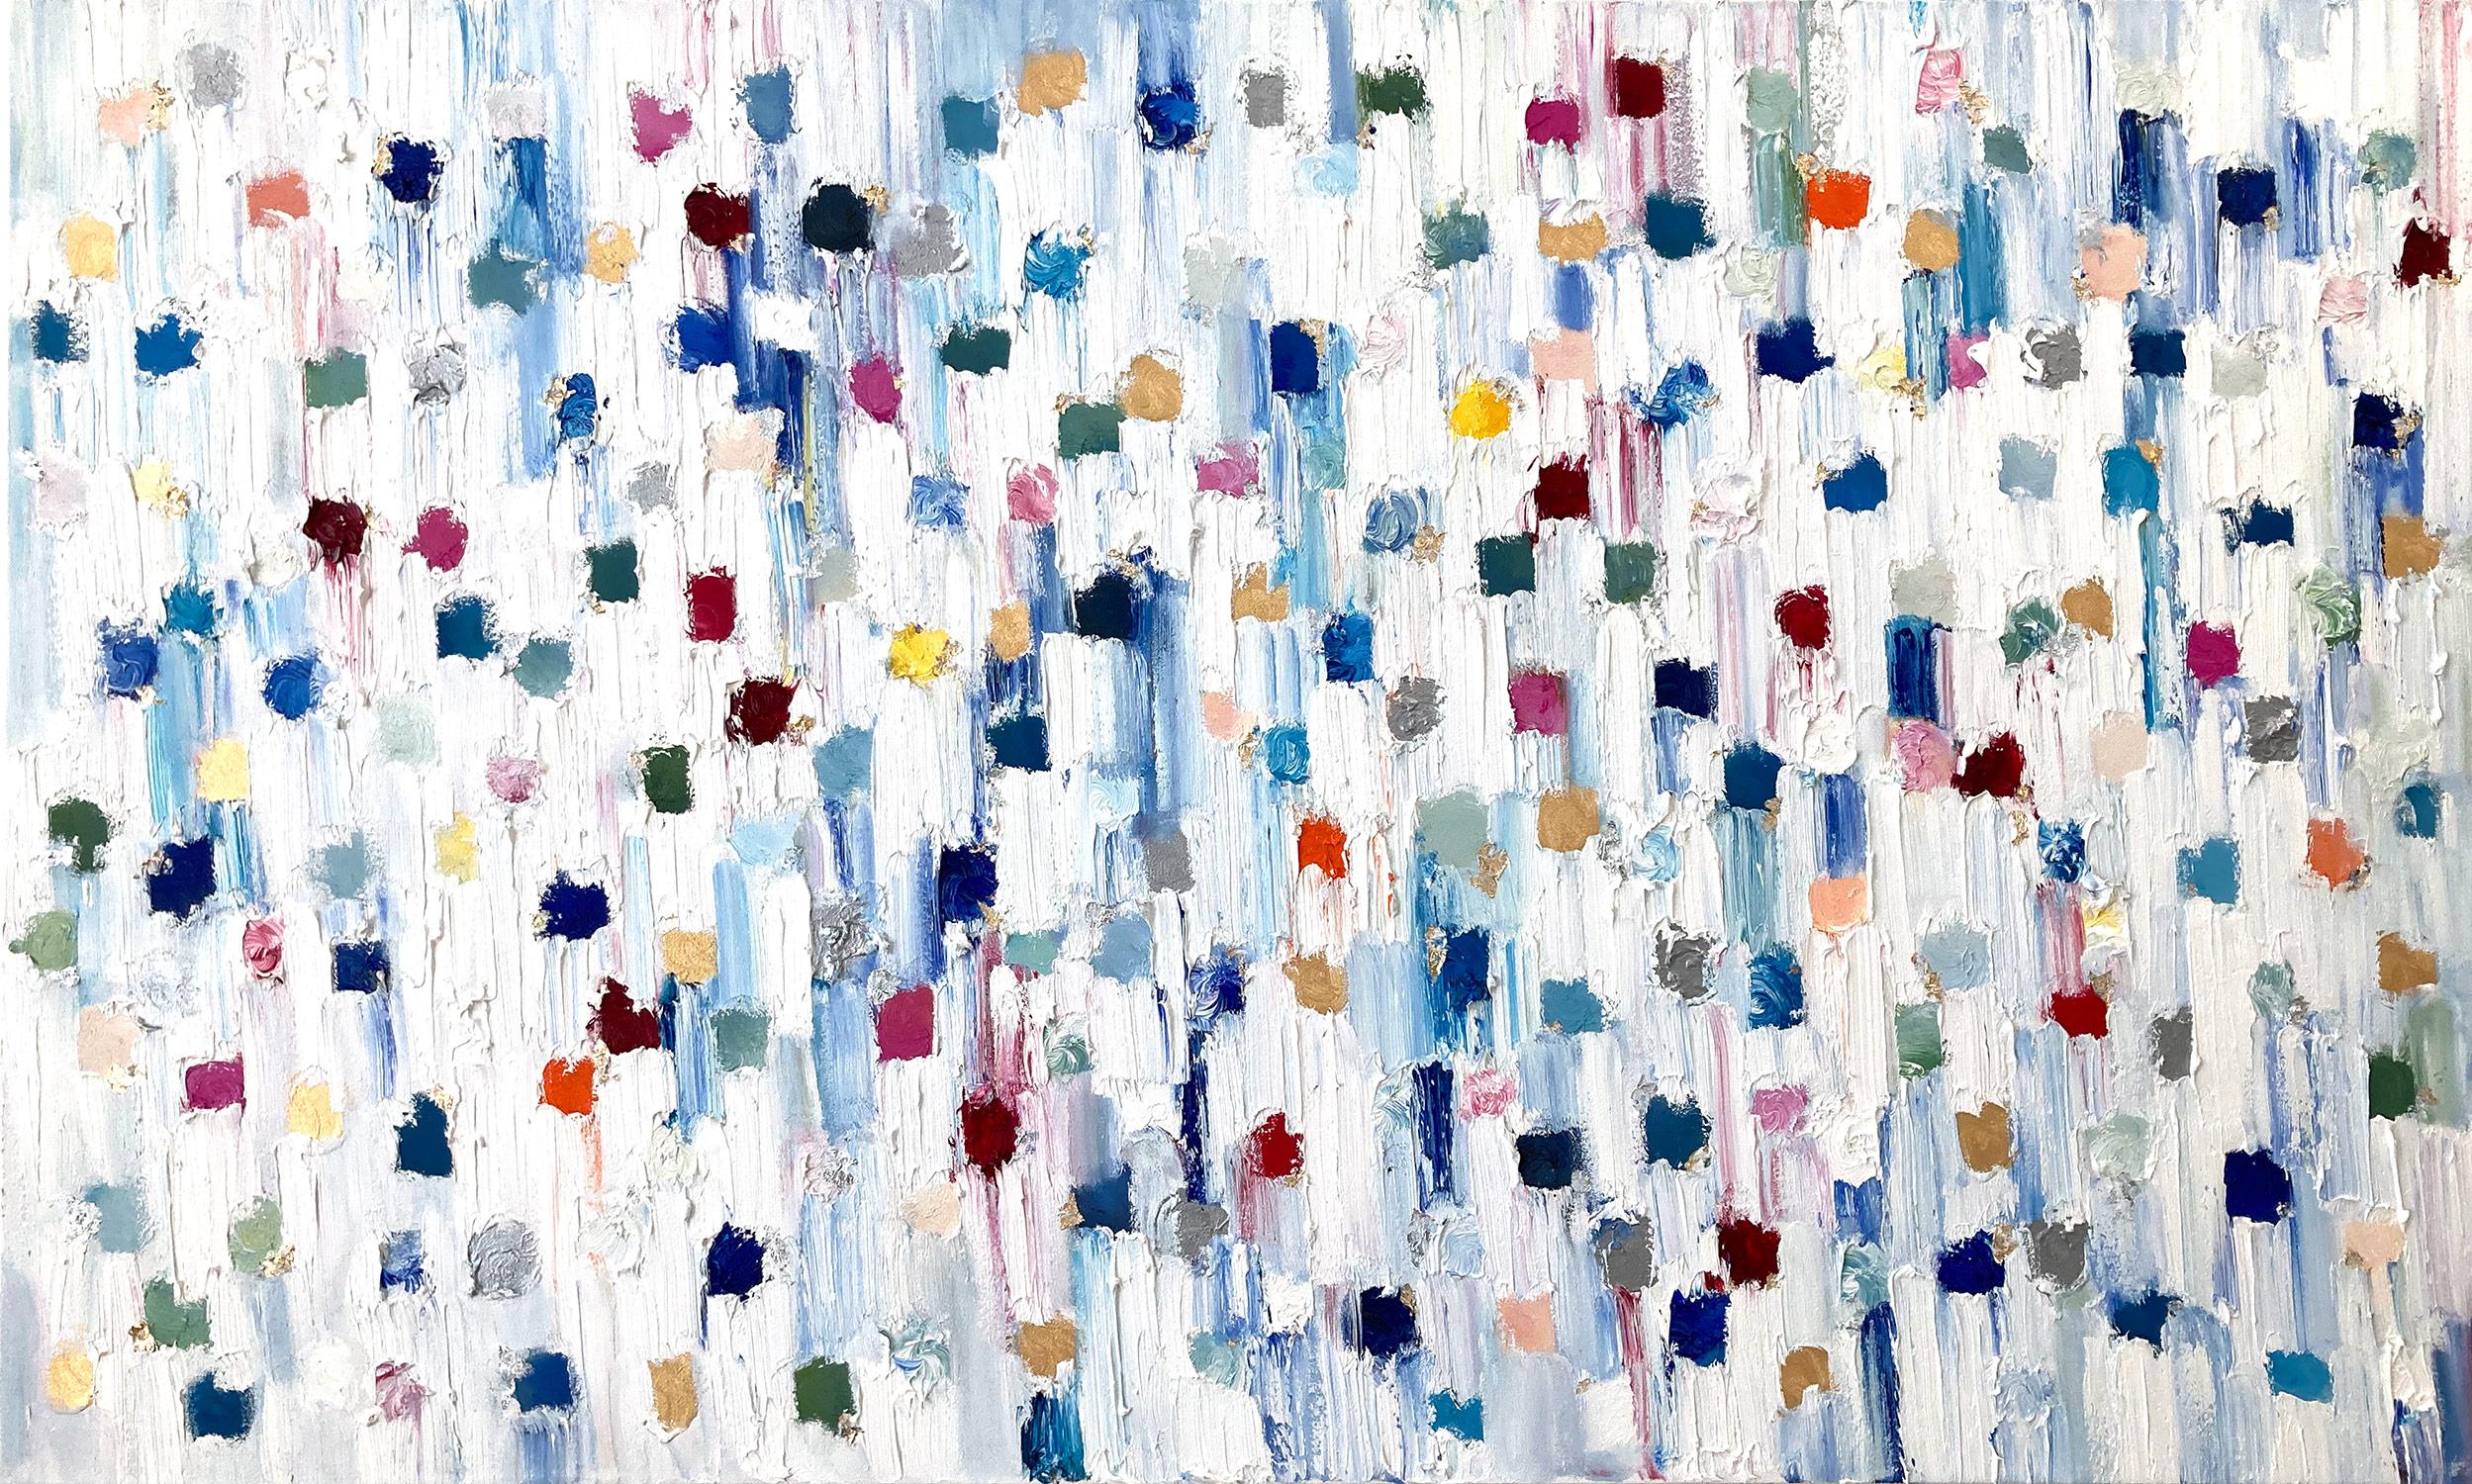 Cindy Shaoul Abstract Painting - "Dripping Dots - Saint Barths" Colorful Abstract Oil Painting on Canvas